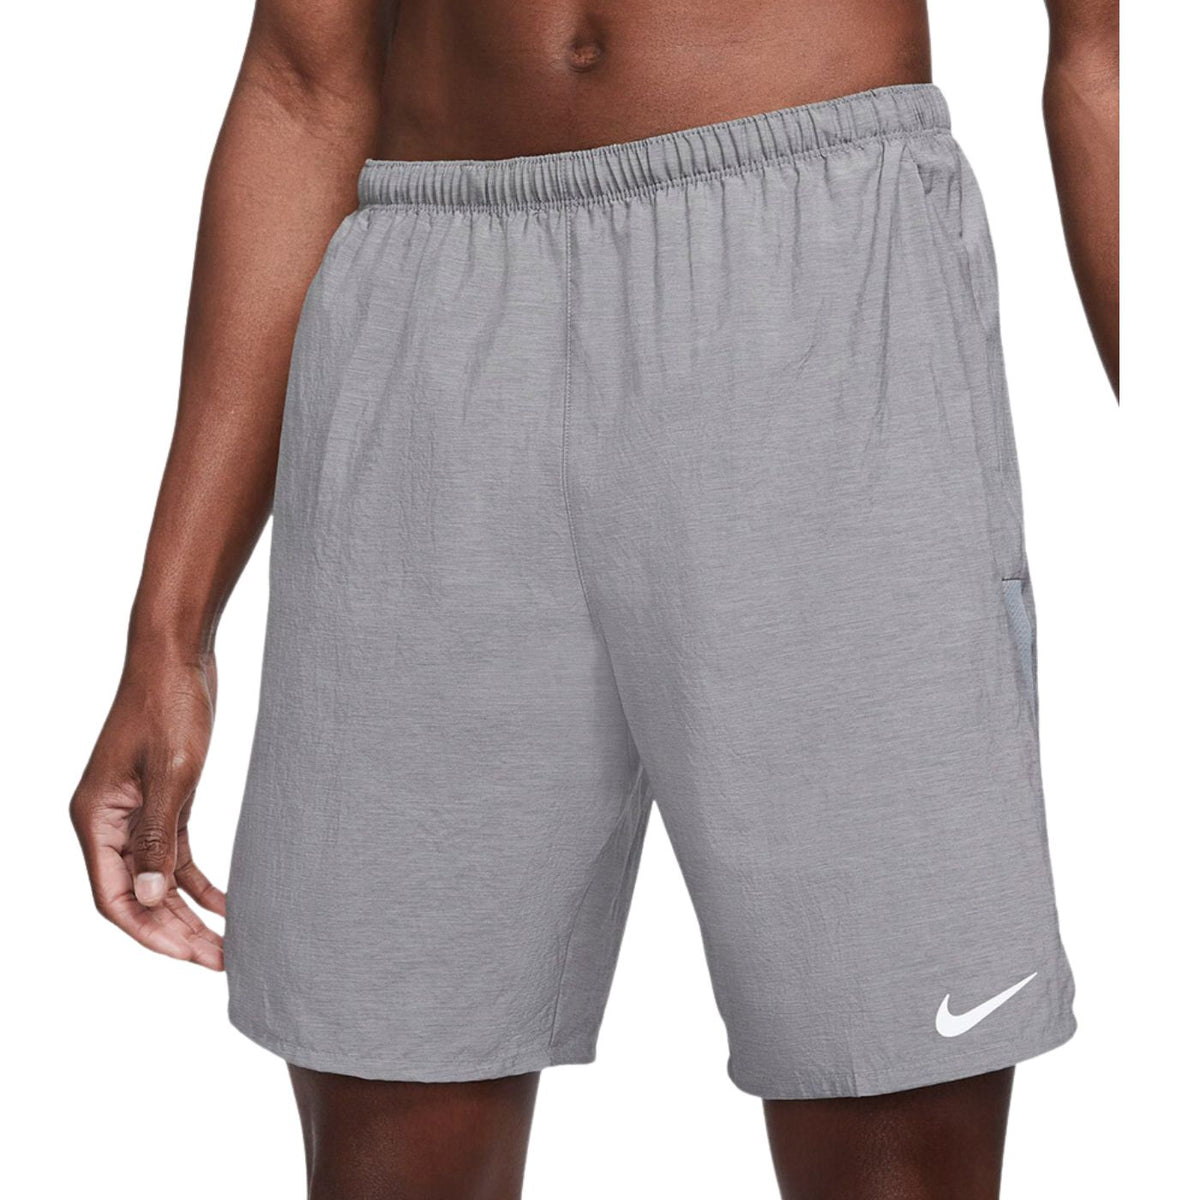 NIKE CHALLENGERS SHORTS 7” “GREY”